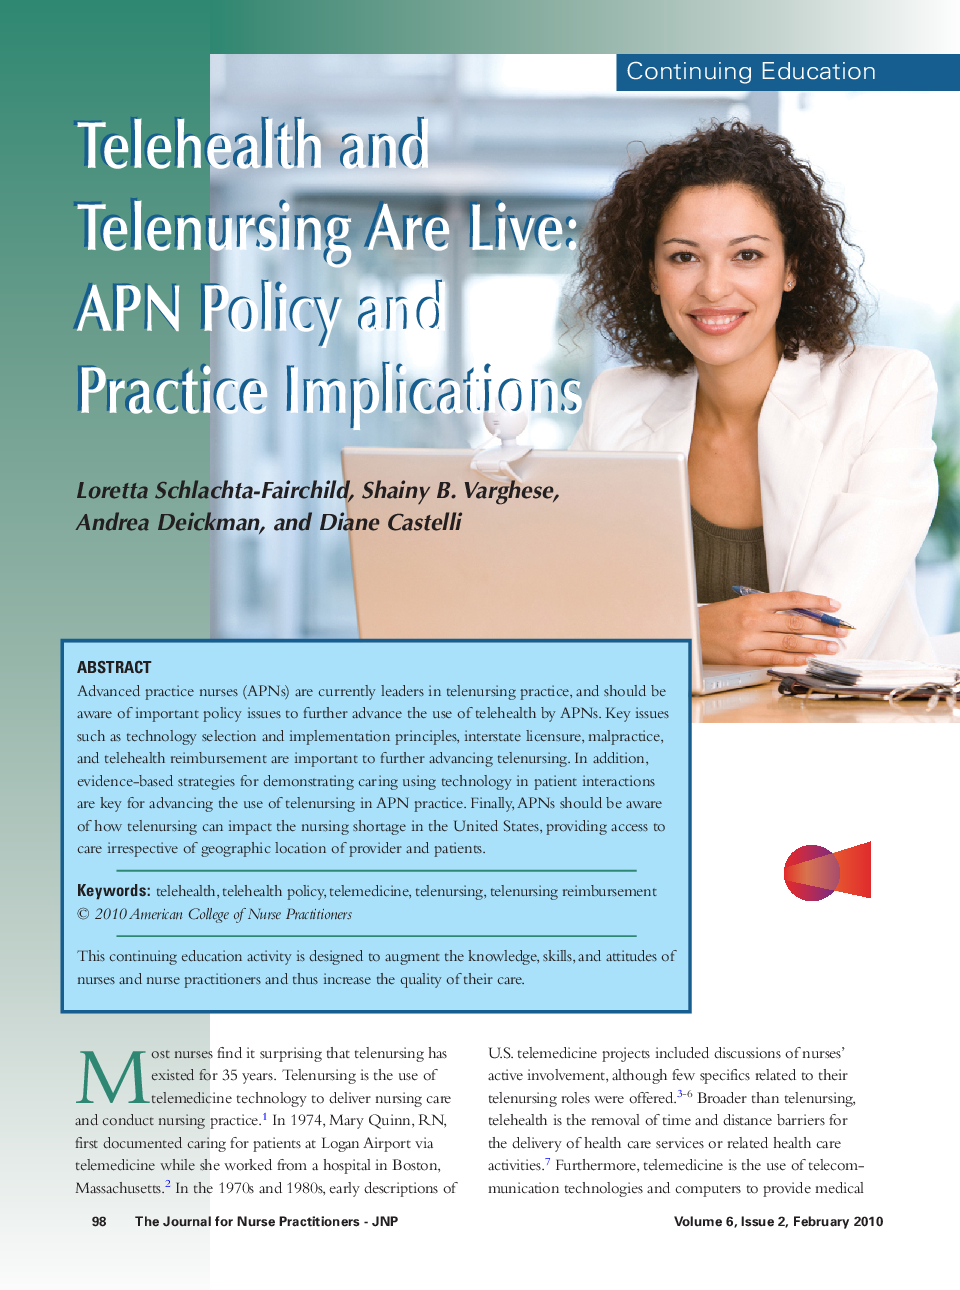 Telehealth and Telenursing Are Live: APN Policy and Practice Implications 